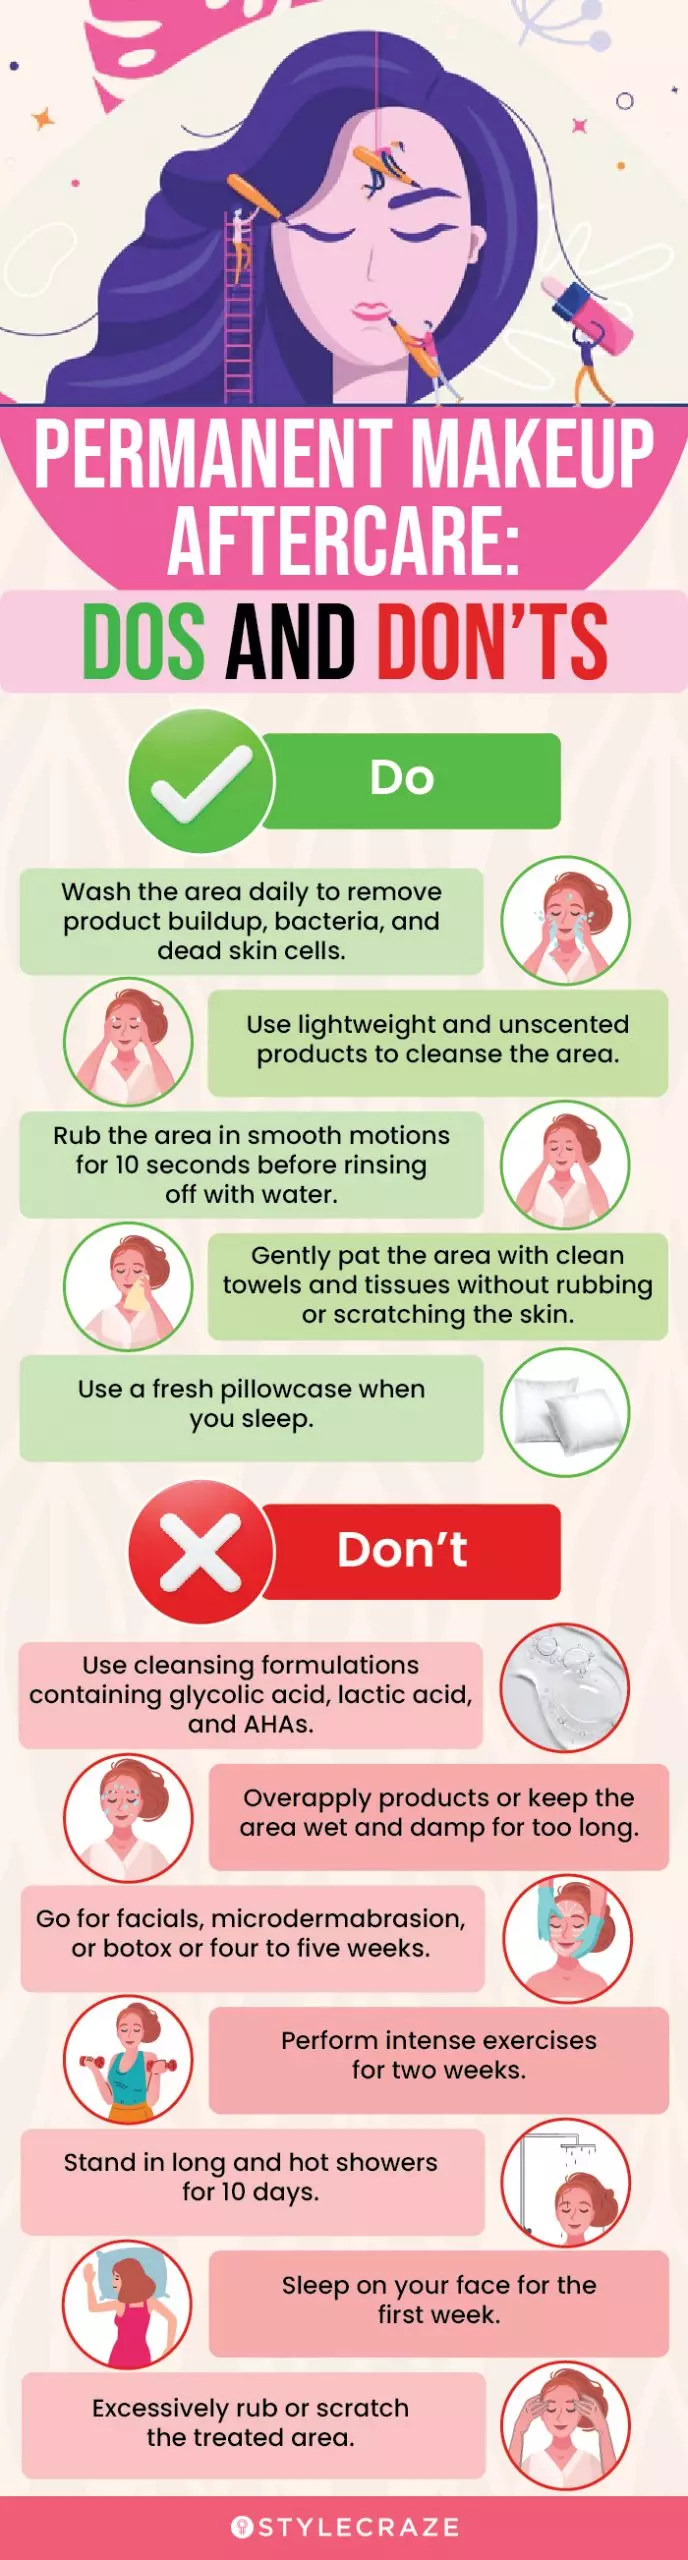 Permanent Makeup Aftercare: Dos And Don’ts (infographic)